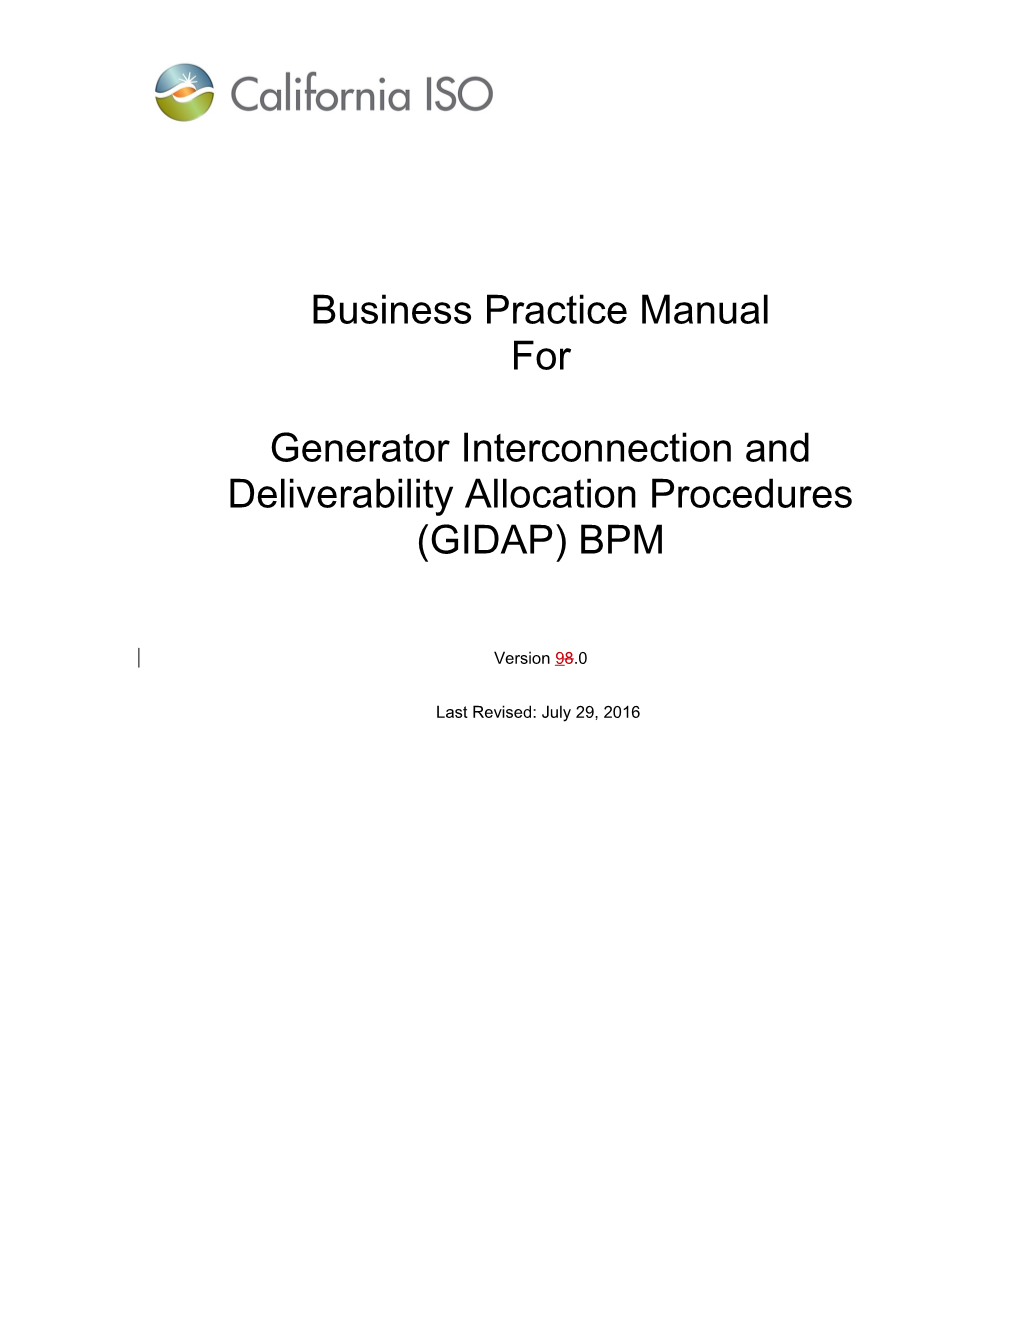 CAISO Business Practice Manual BPM for the Generator Interconnection and Deliverability